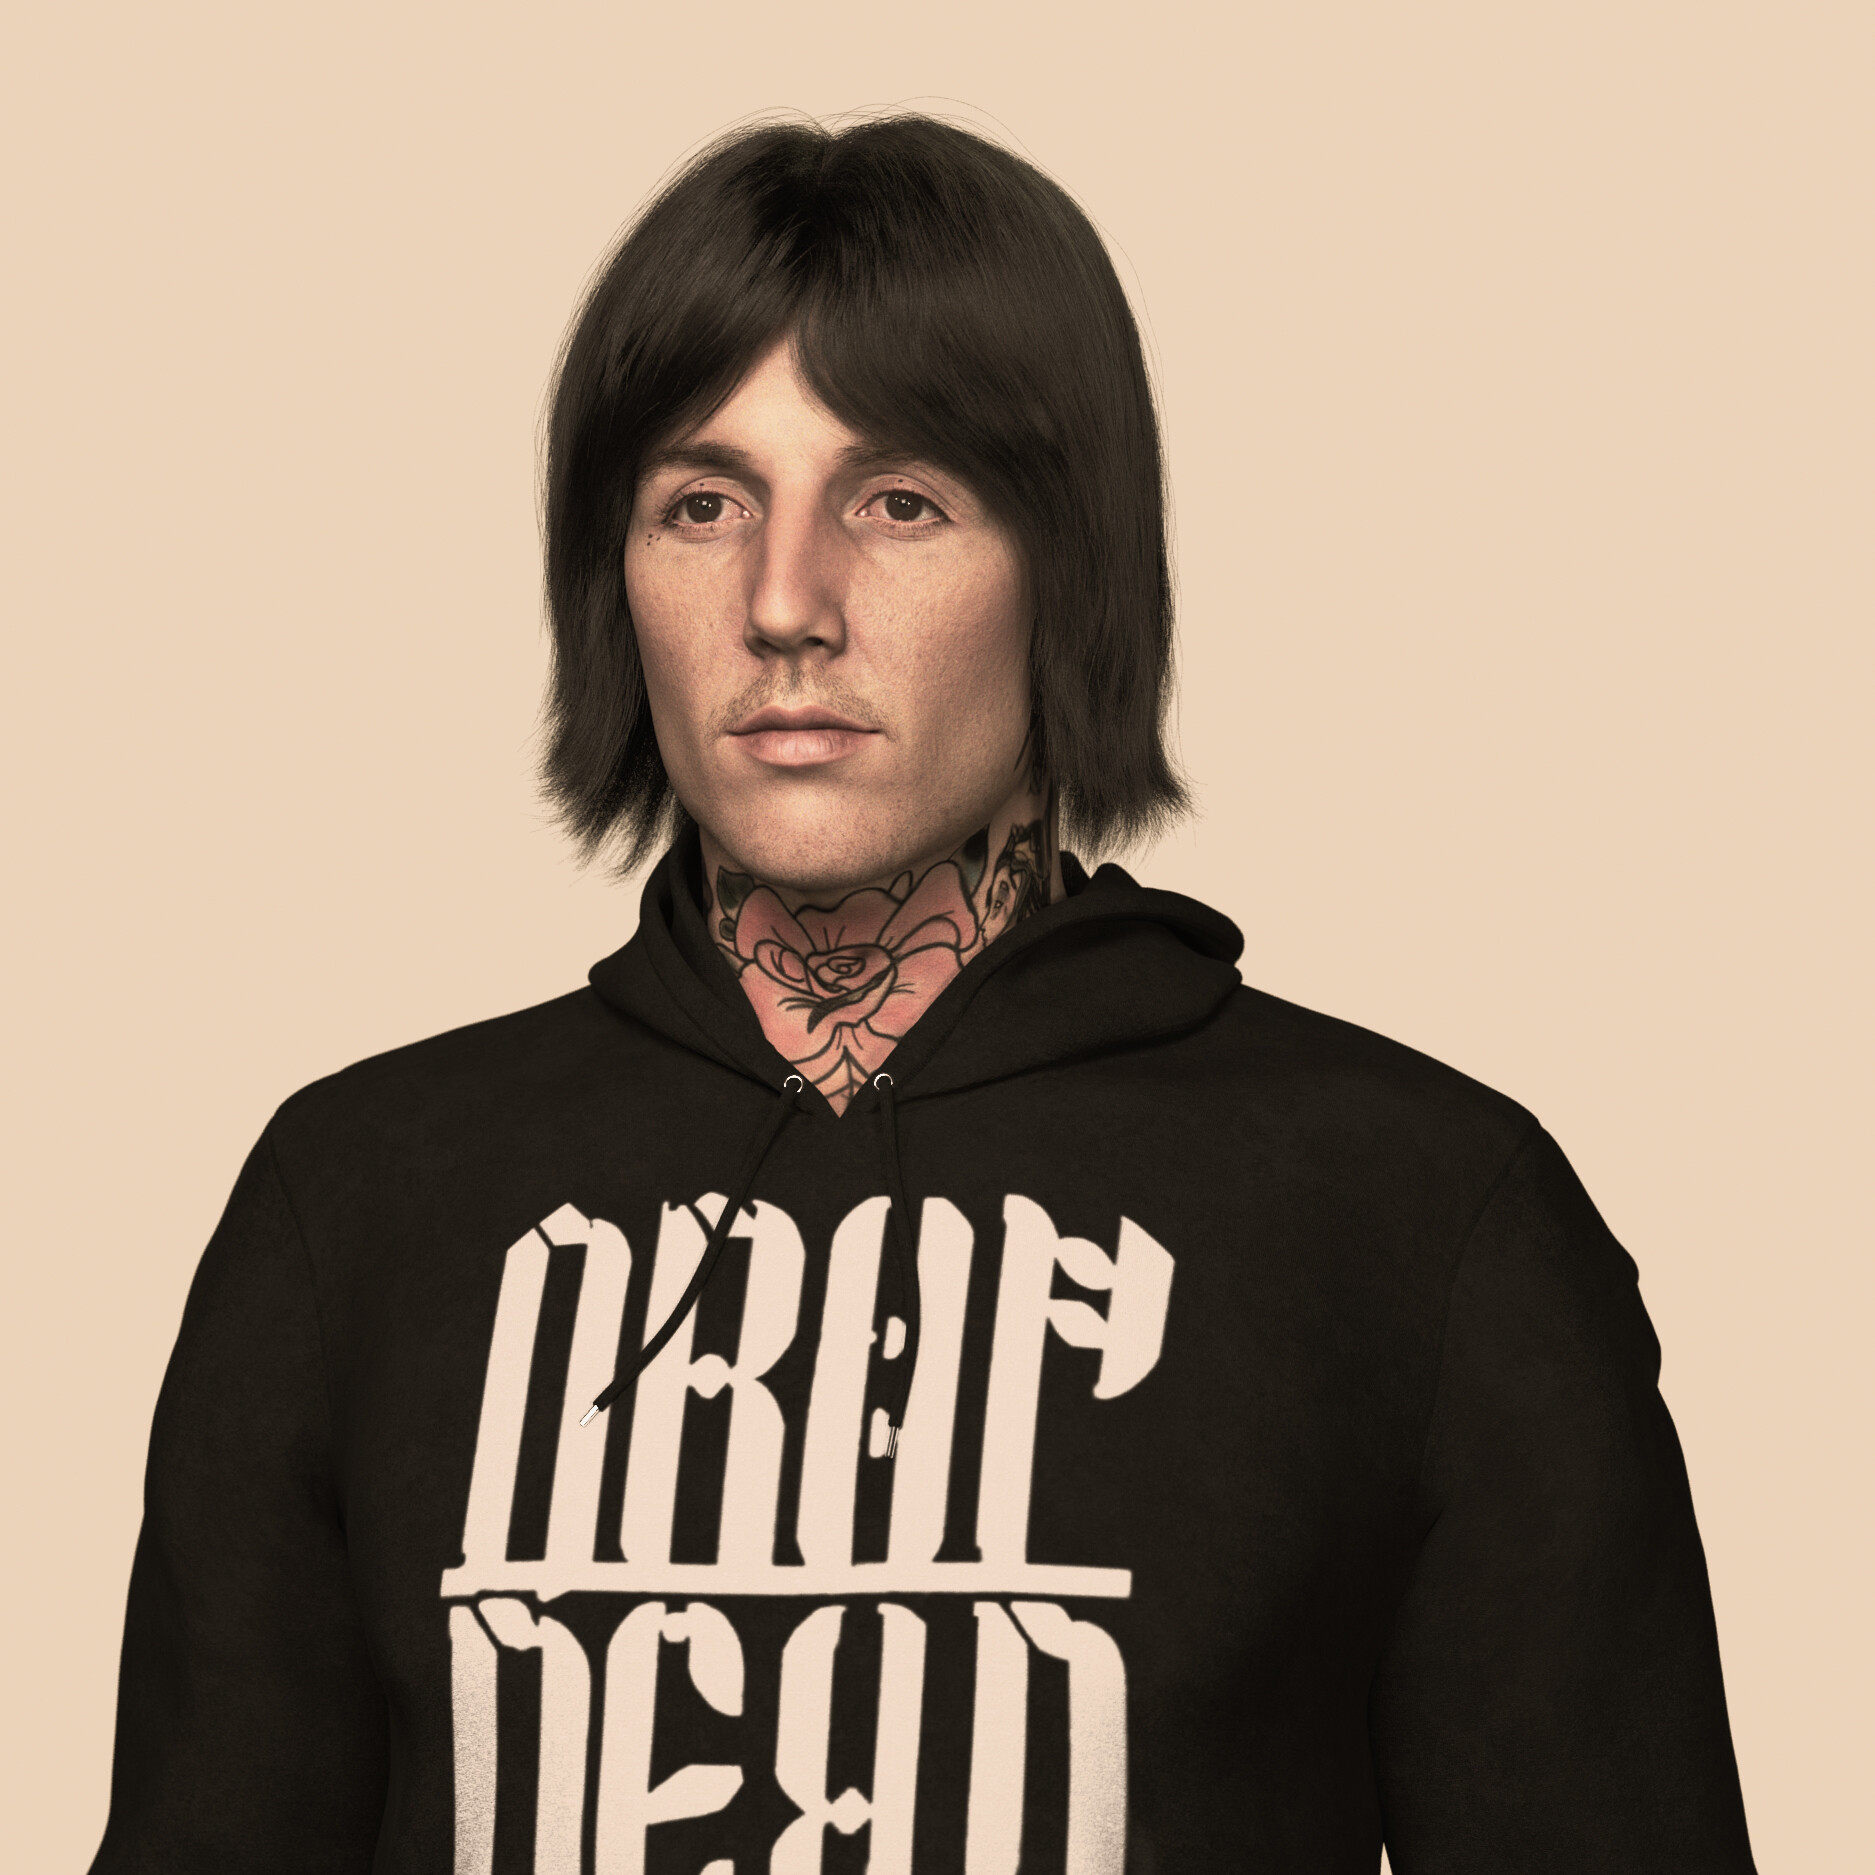 72 Oliver Sykes Images, Stock Photos, 3D objects, & Vectors